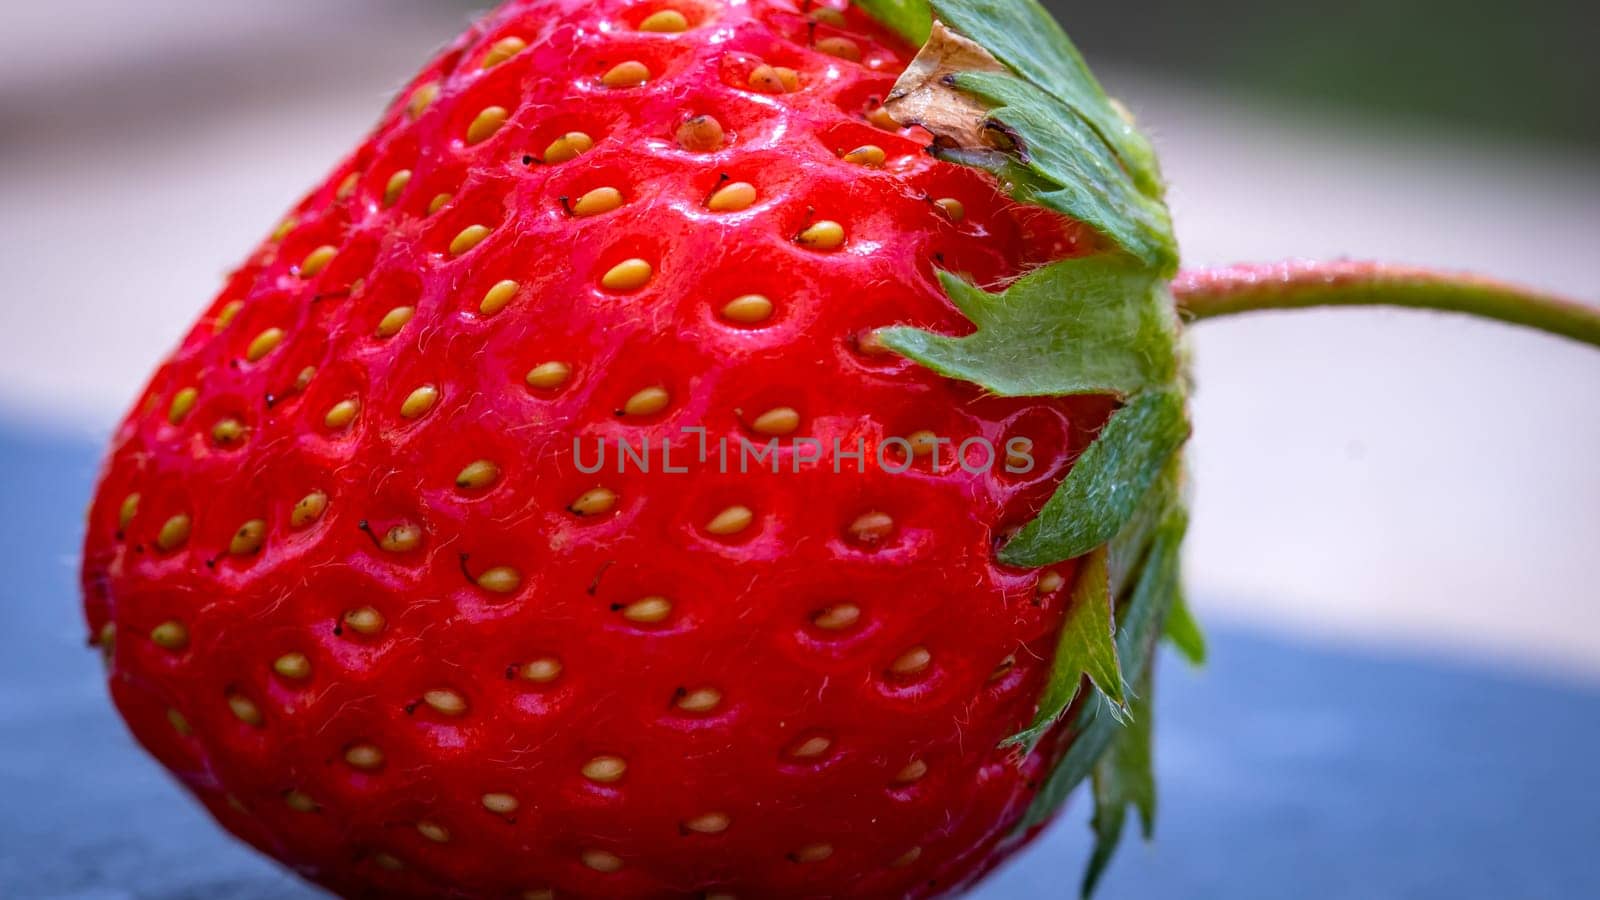 Close up of fresh strawberry showing seeds achenes. Details of a fresh ripe red strawberry.